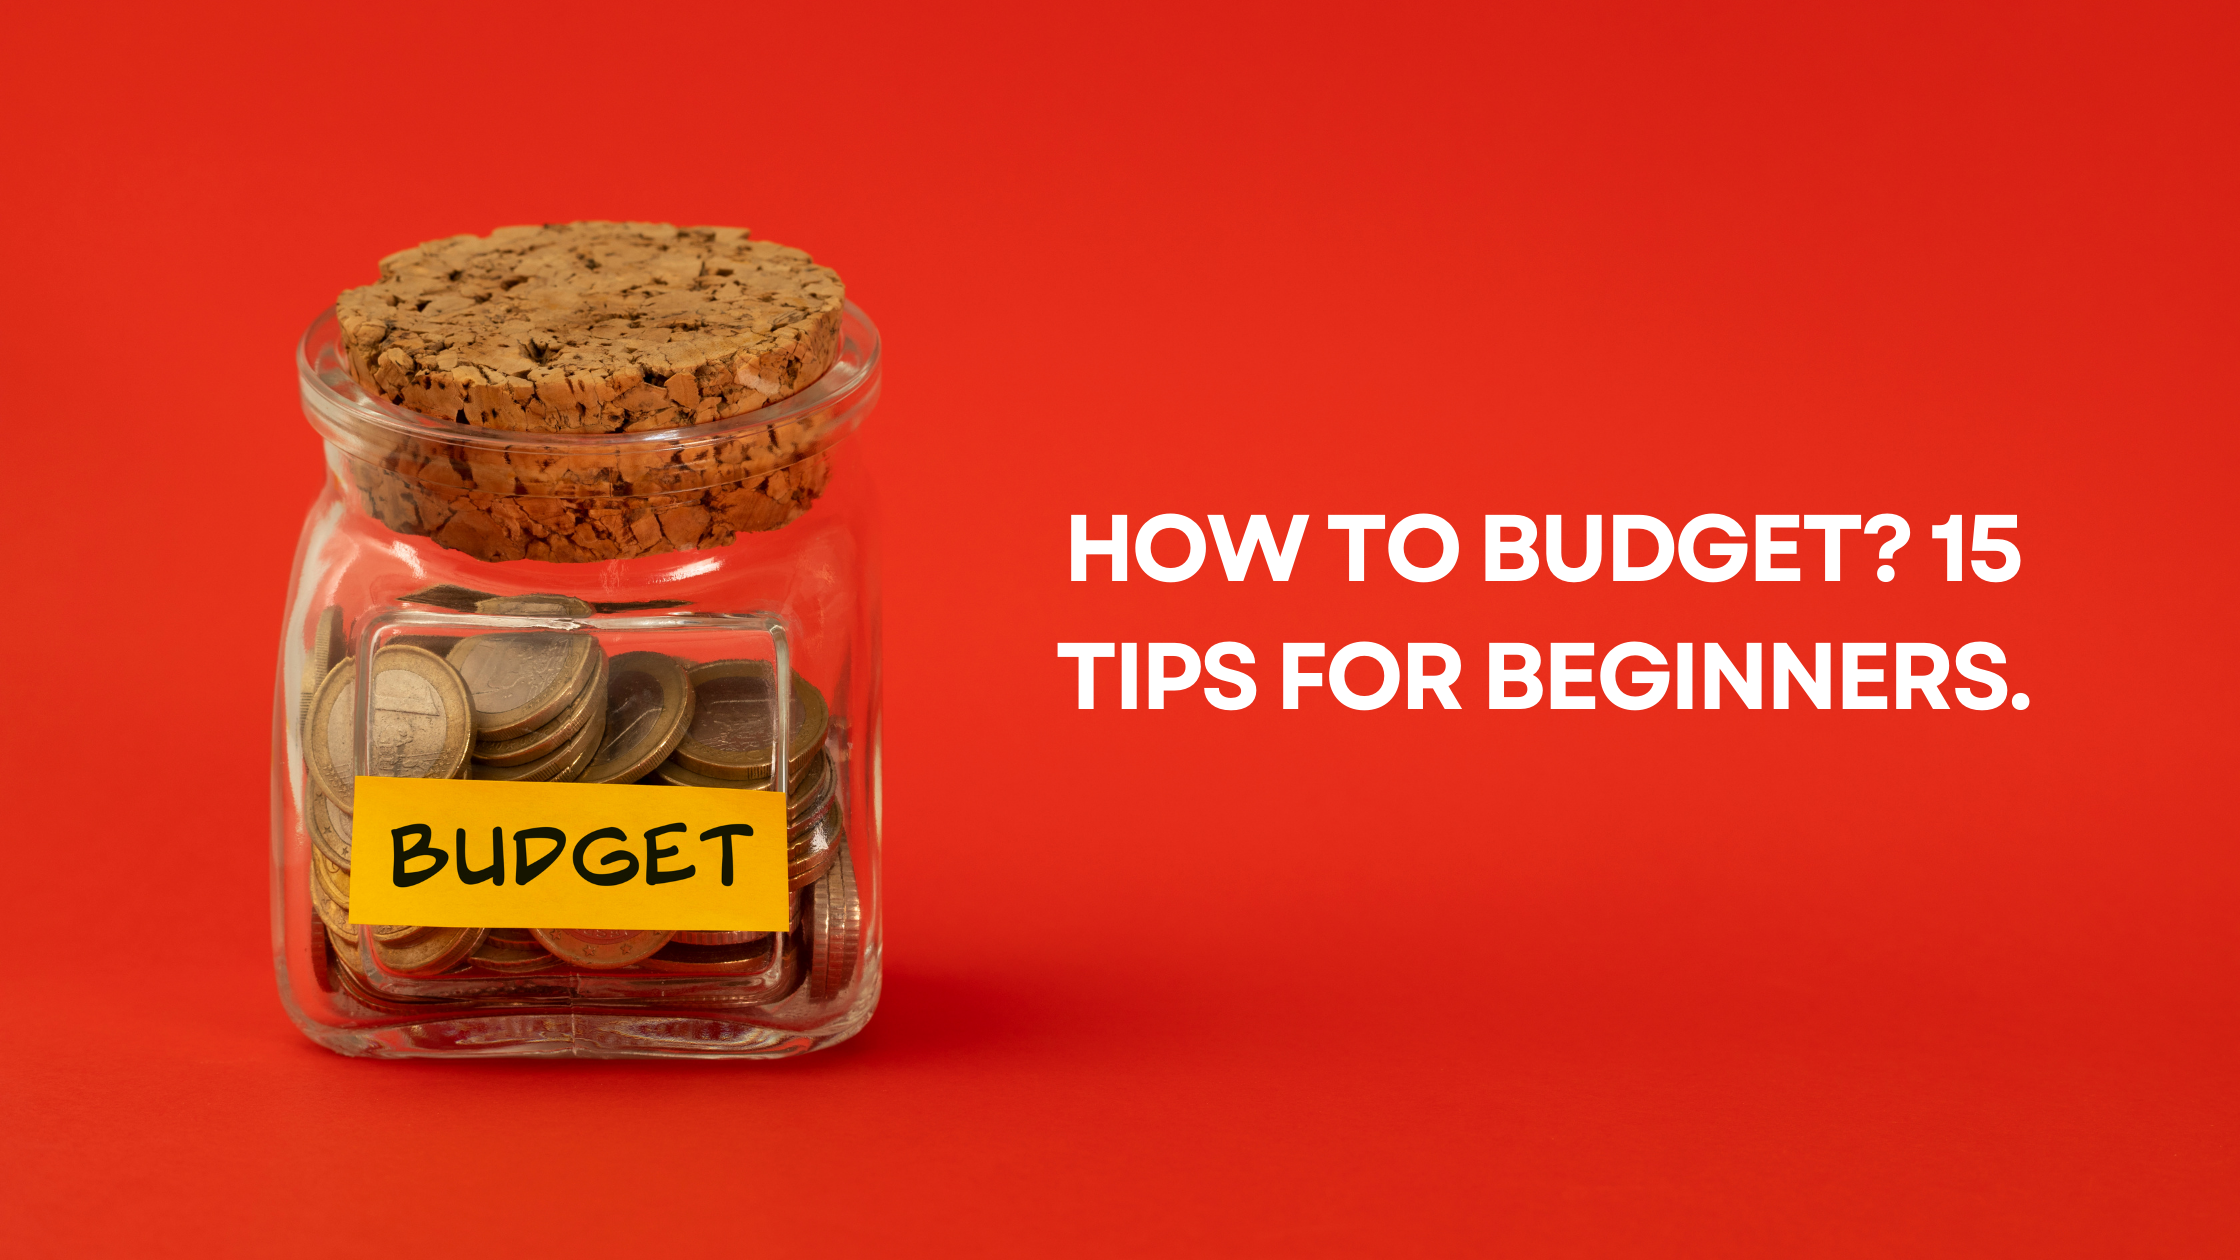 How to Budget for Beginners- 15 Tips.